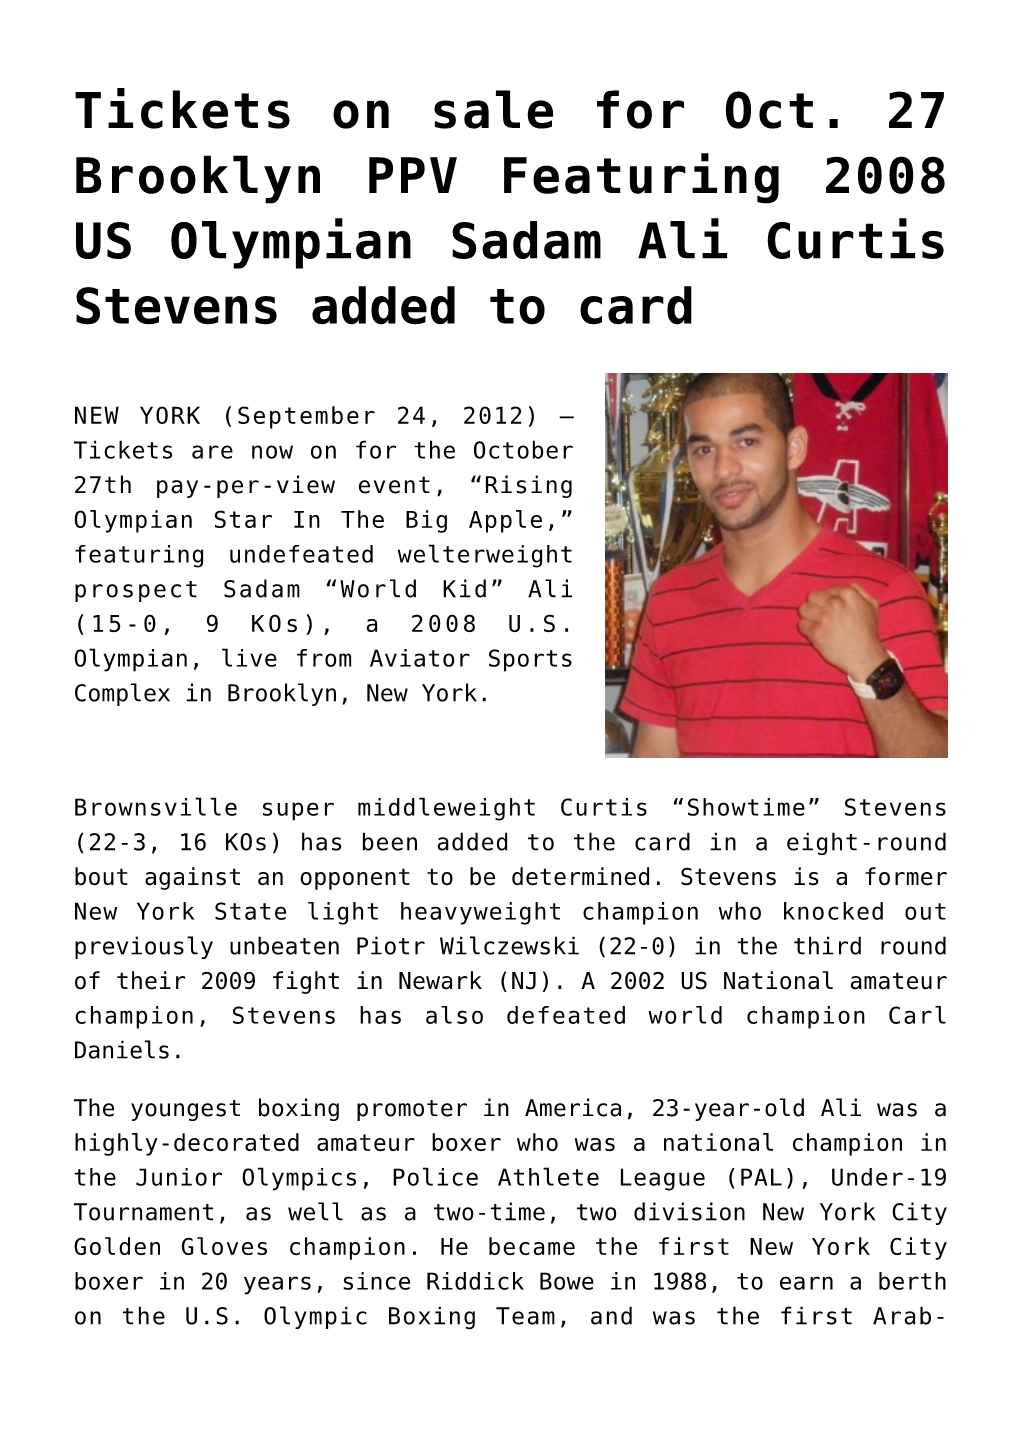 Tickets on Sale for Oct. 27 Brooklyn PPV Featuring 2008 US Olympian Sadam Ali Curtis Stevens Added to Card